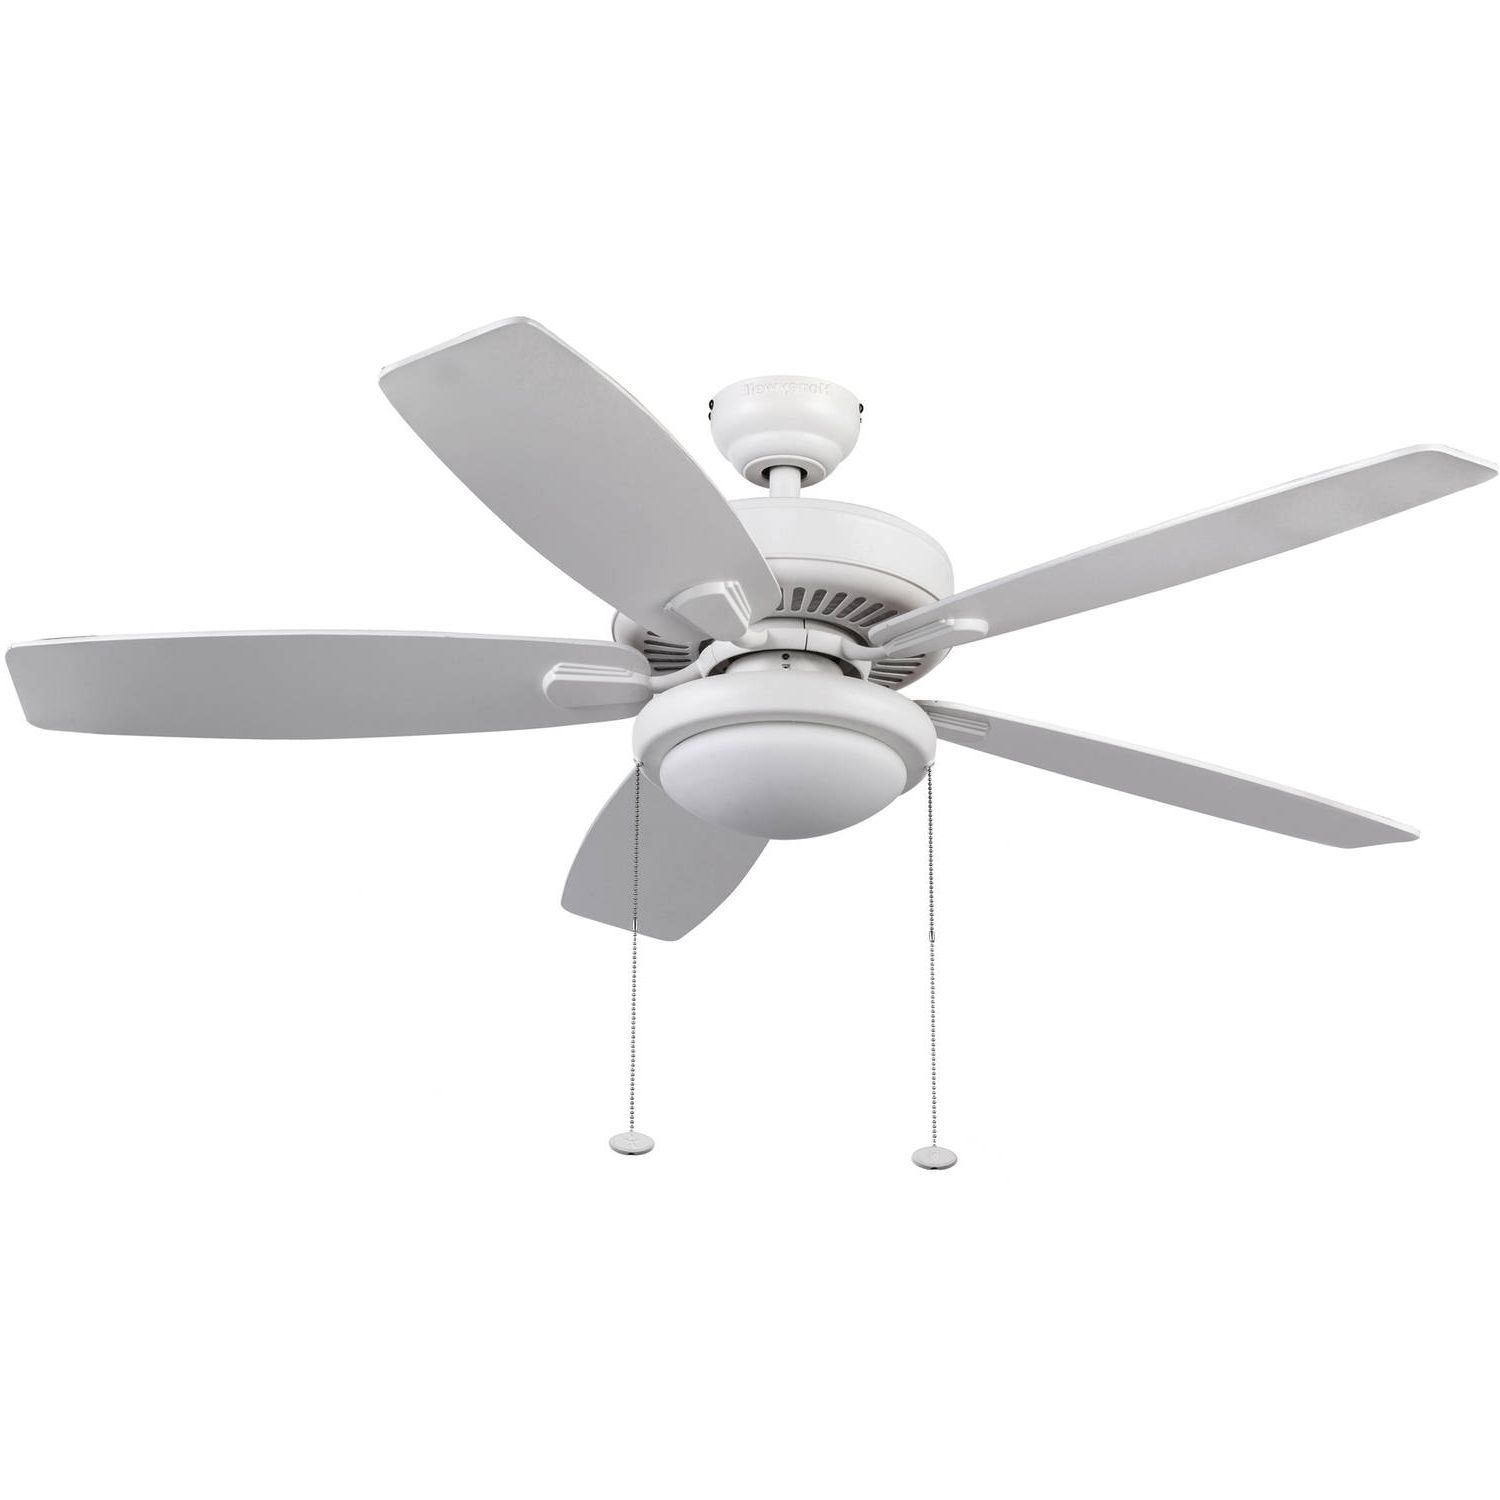 Popular Honeywell Blufton 52" White Outdoor Ceiling Fan – Walmart With Regard To Outdoor Ceiling Fans At Walmart (View 1 of 20)